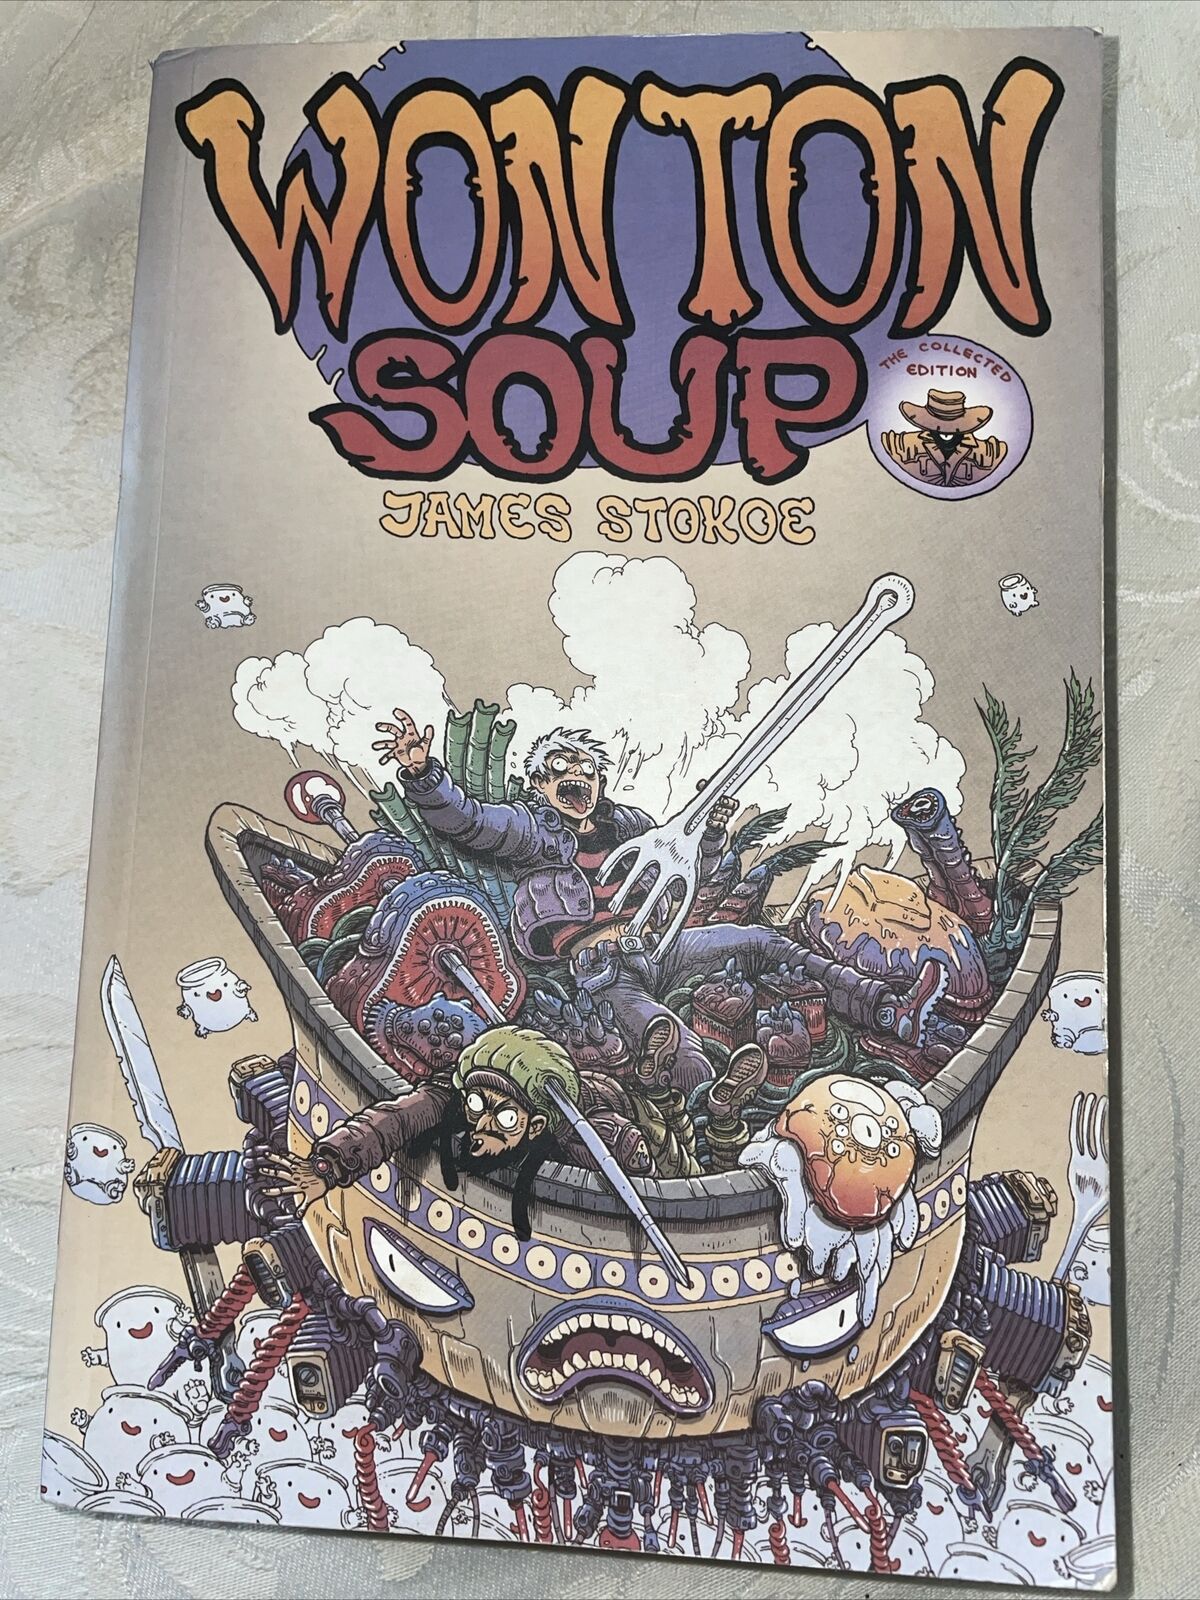 Wonton Soup: The Collected Edition Vol 1 (James Stokoe) Excellent